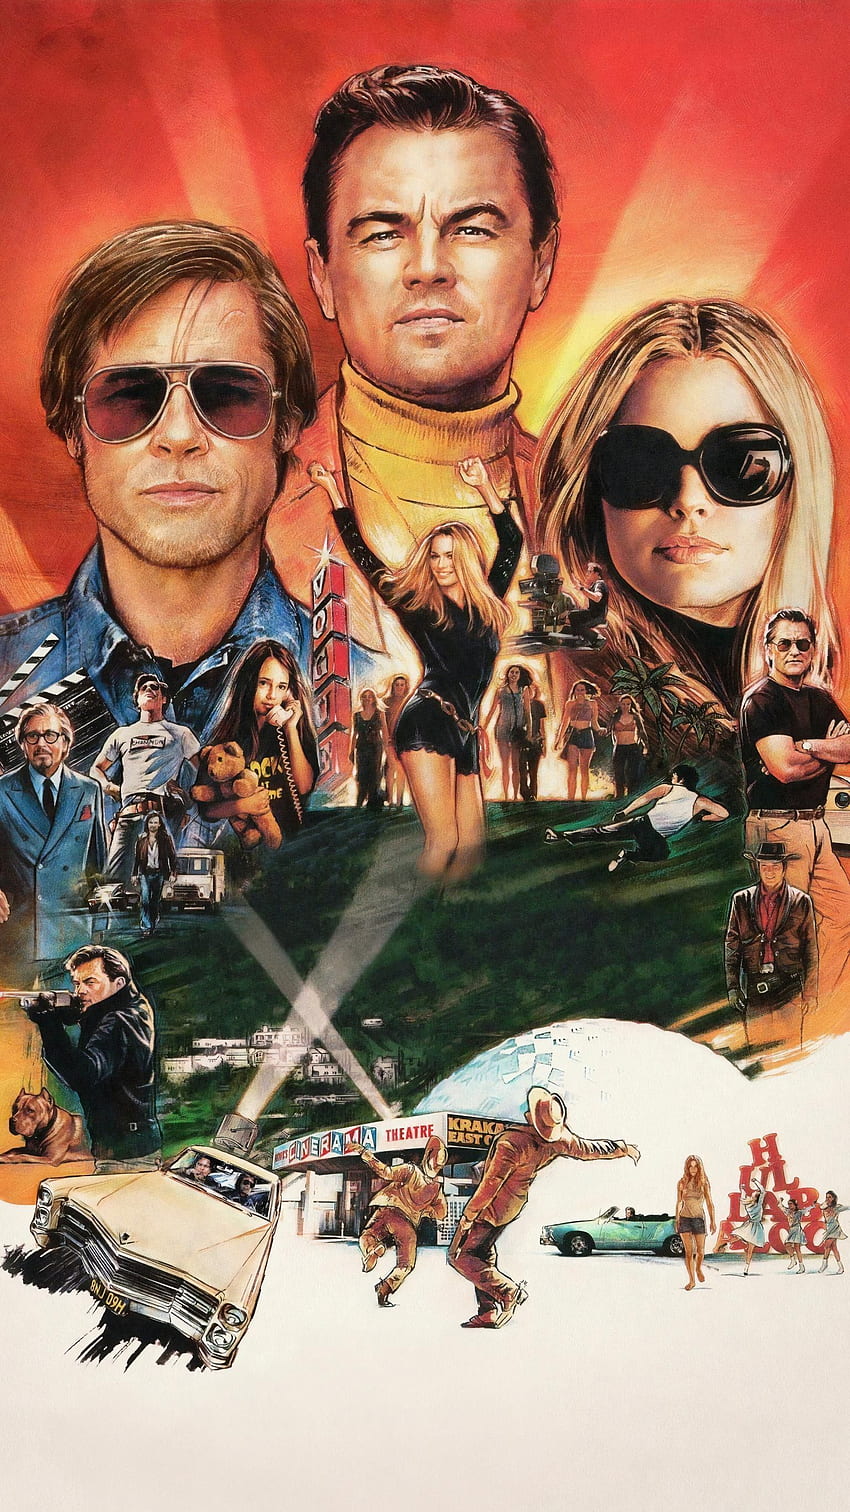 Once Upon a Time in Hollywood (2019) Telepon . Moviemania. Poster film vintage, film Quentin tarantino, poster film ikonik, Hollywood Retro wallpaper ponsel HD